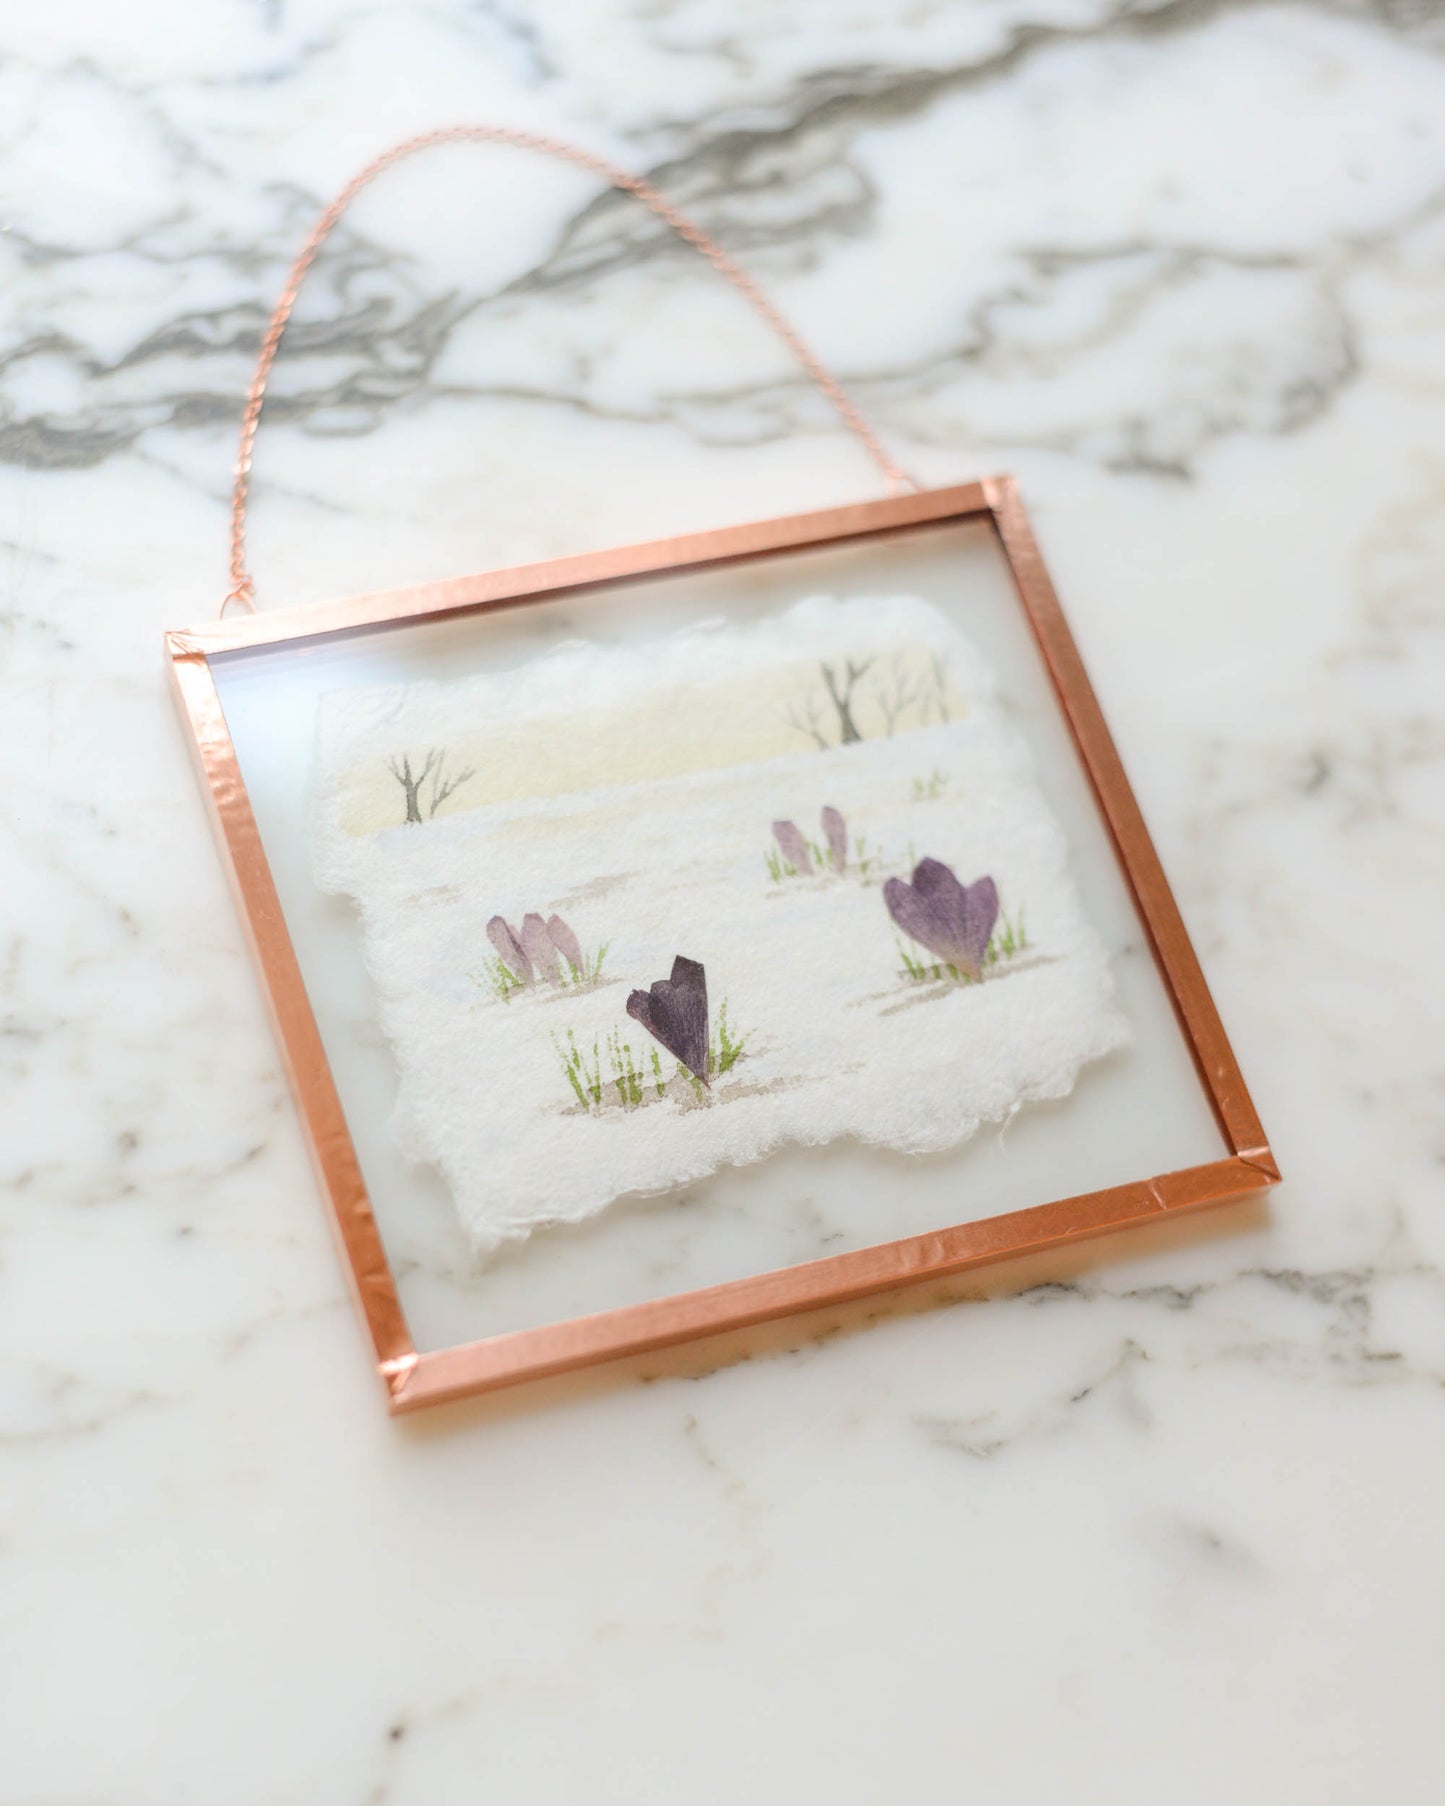 Harbingers: Crocus at Dawn - Watercolor in Small Glass and Copper Wall Hanging